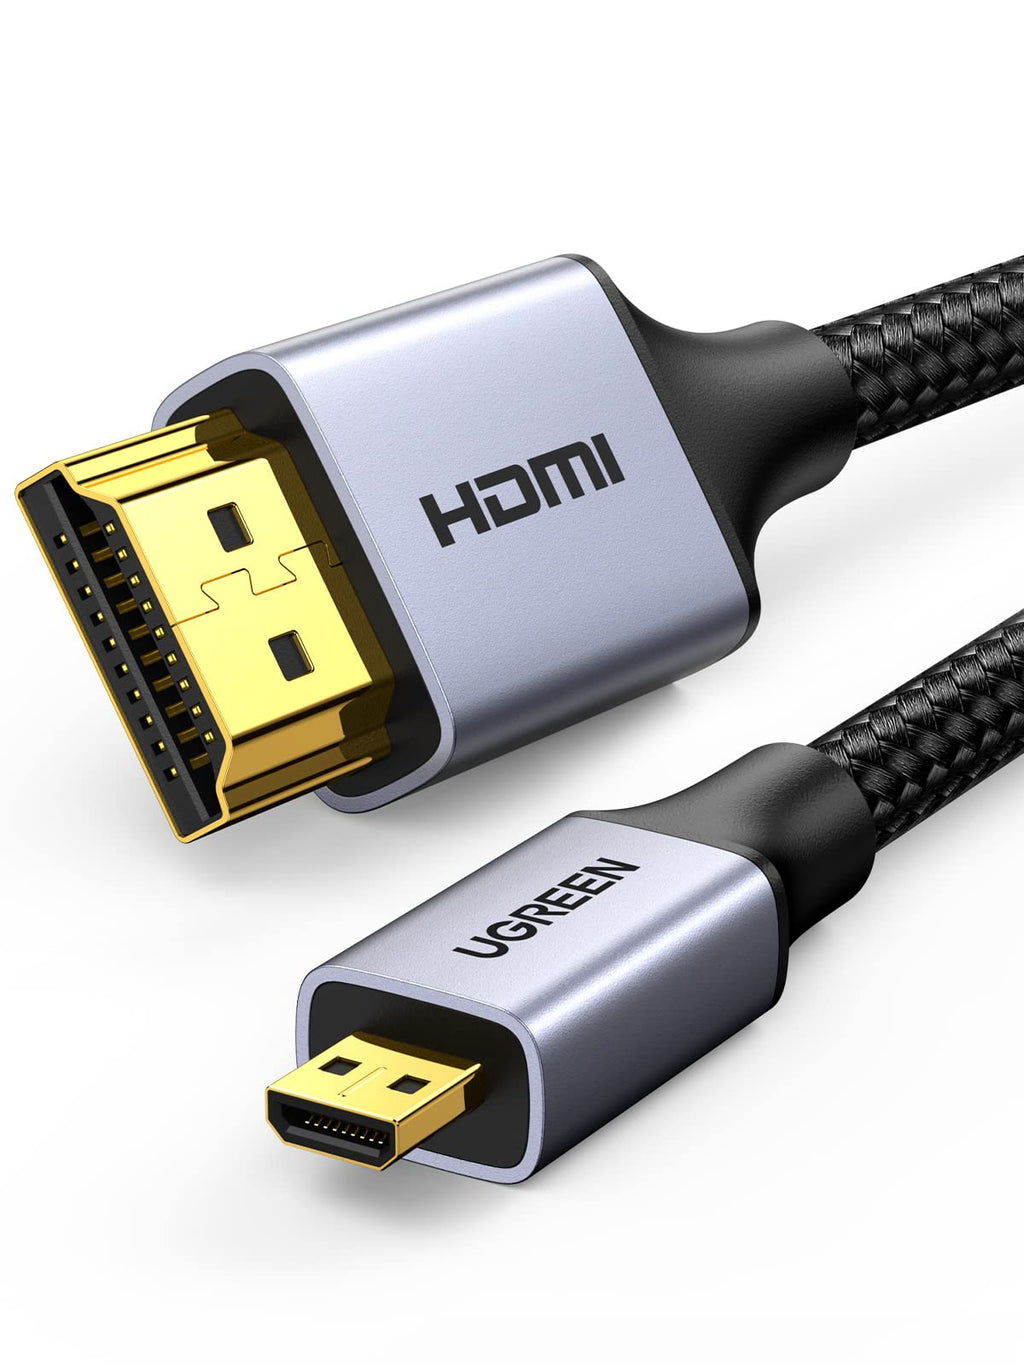 UGREEN 4K 60Hz Micro HDMI to HDMI Cable 3.3FT, Aluminum Shell Braided Micro HDMI 2.0 Cord Support HDR 3D ARC High Speed 18Gbps Compatible with Hero 7 6 5 Sony A6000 A6300 Camera Nikon B500 Yoga 3 Pro